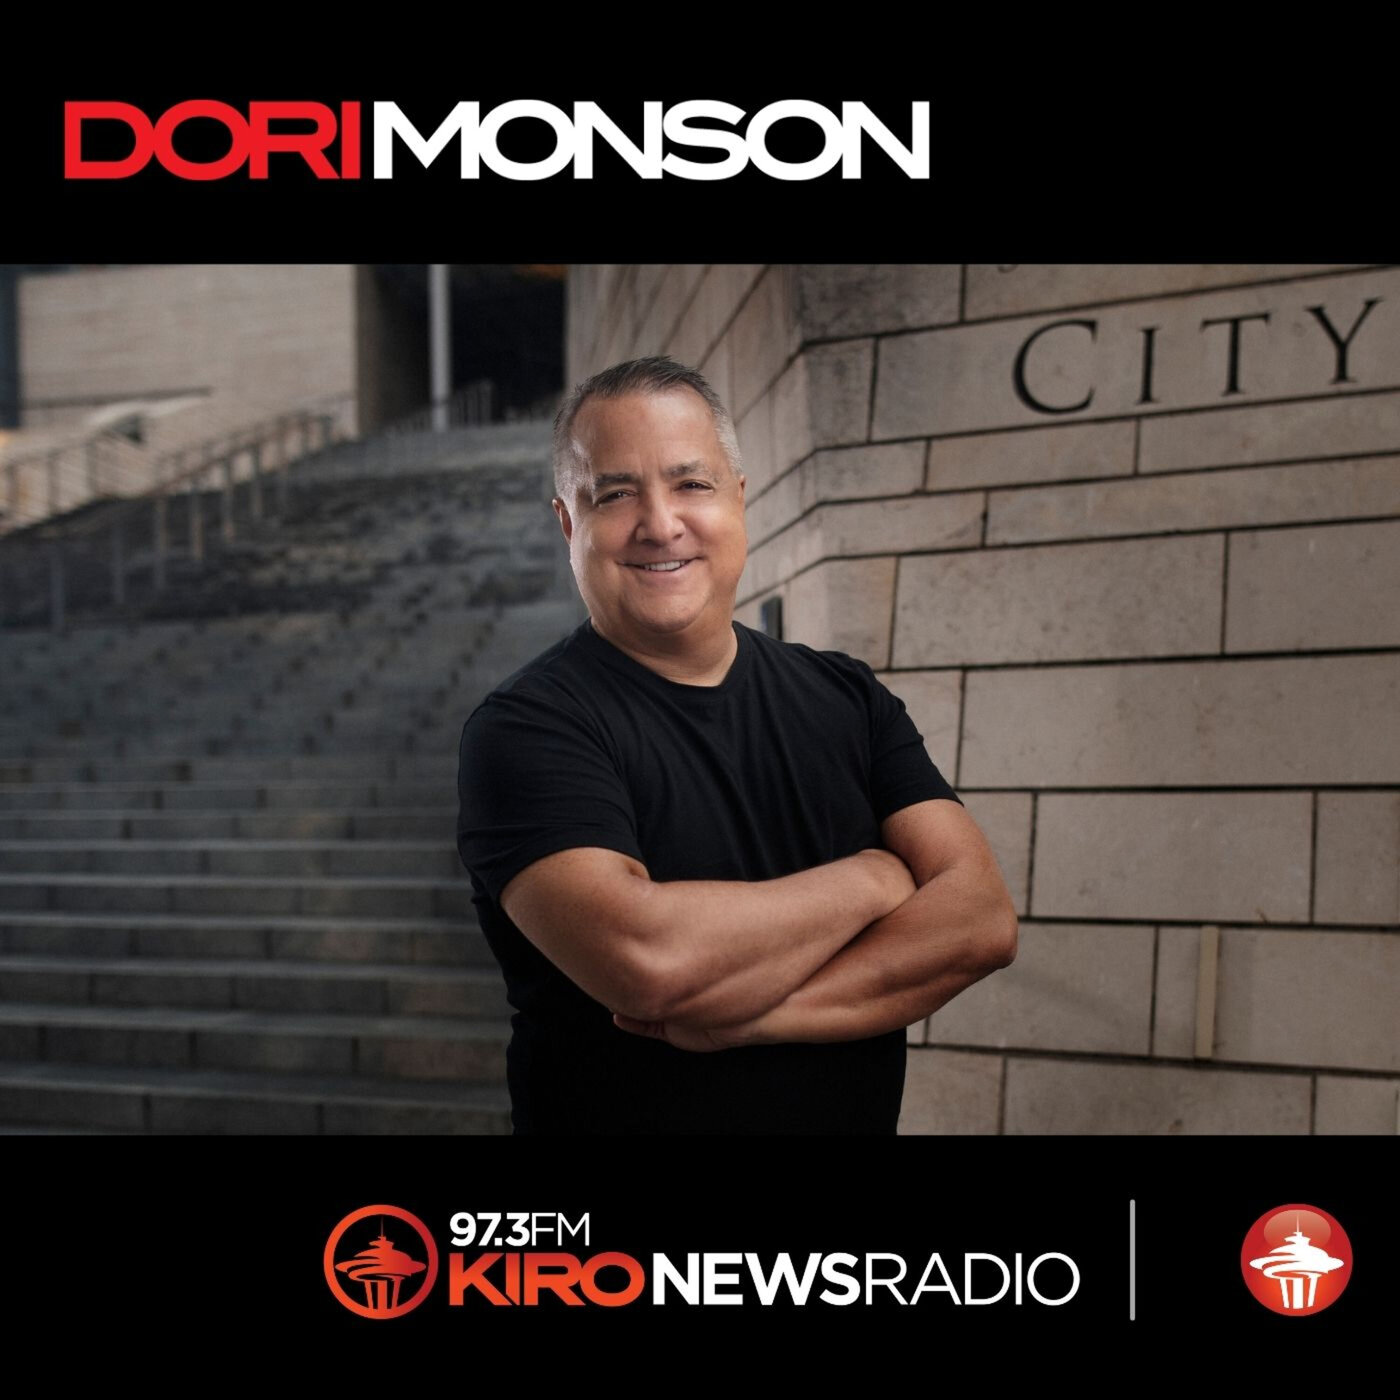 The Very Best of the Dori Monson Show, Day 2: Hour 1